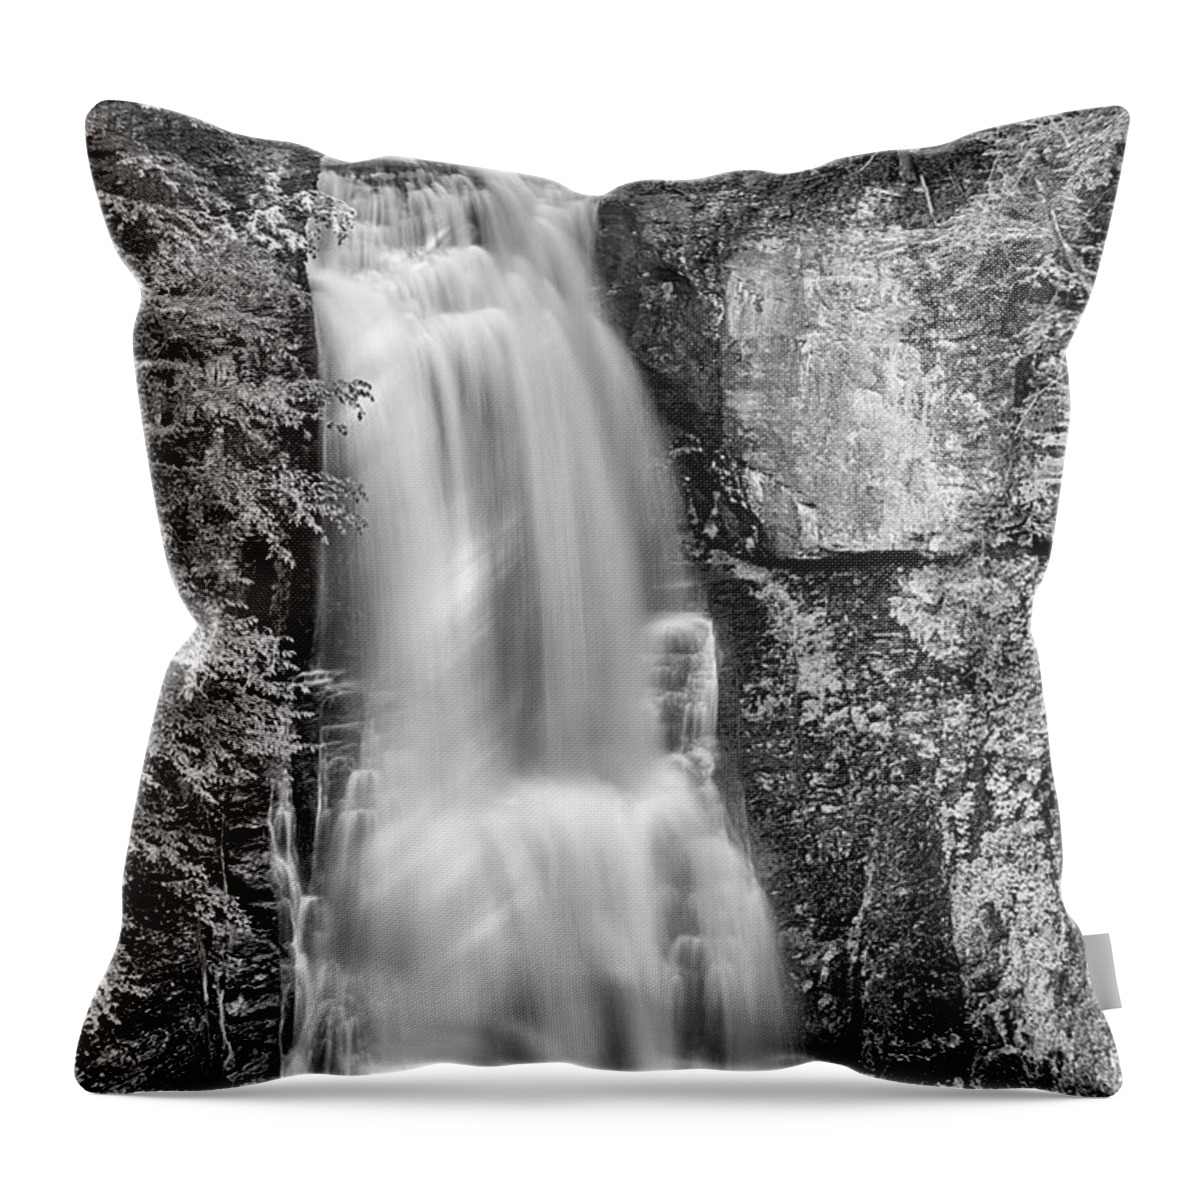 Pennsylvania Throw Pillow featuring the photograph Bushkill Falls by Anthony Sacco